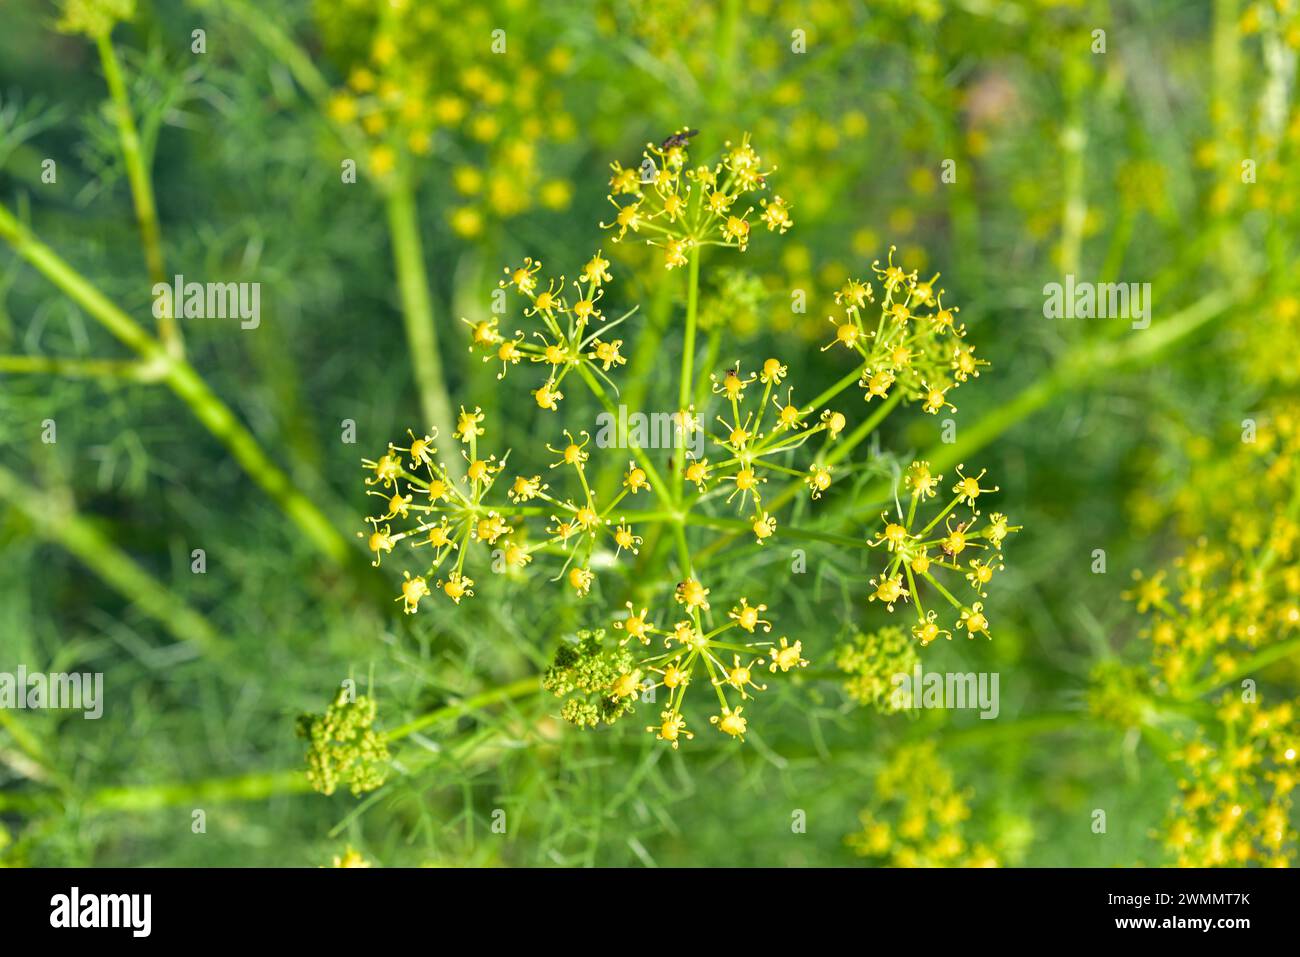 Common basilisk (Prangos ferulacea) is a perennial herb native to southeastern Europe and western Asia. Inflorescence detail. Stock Photo